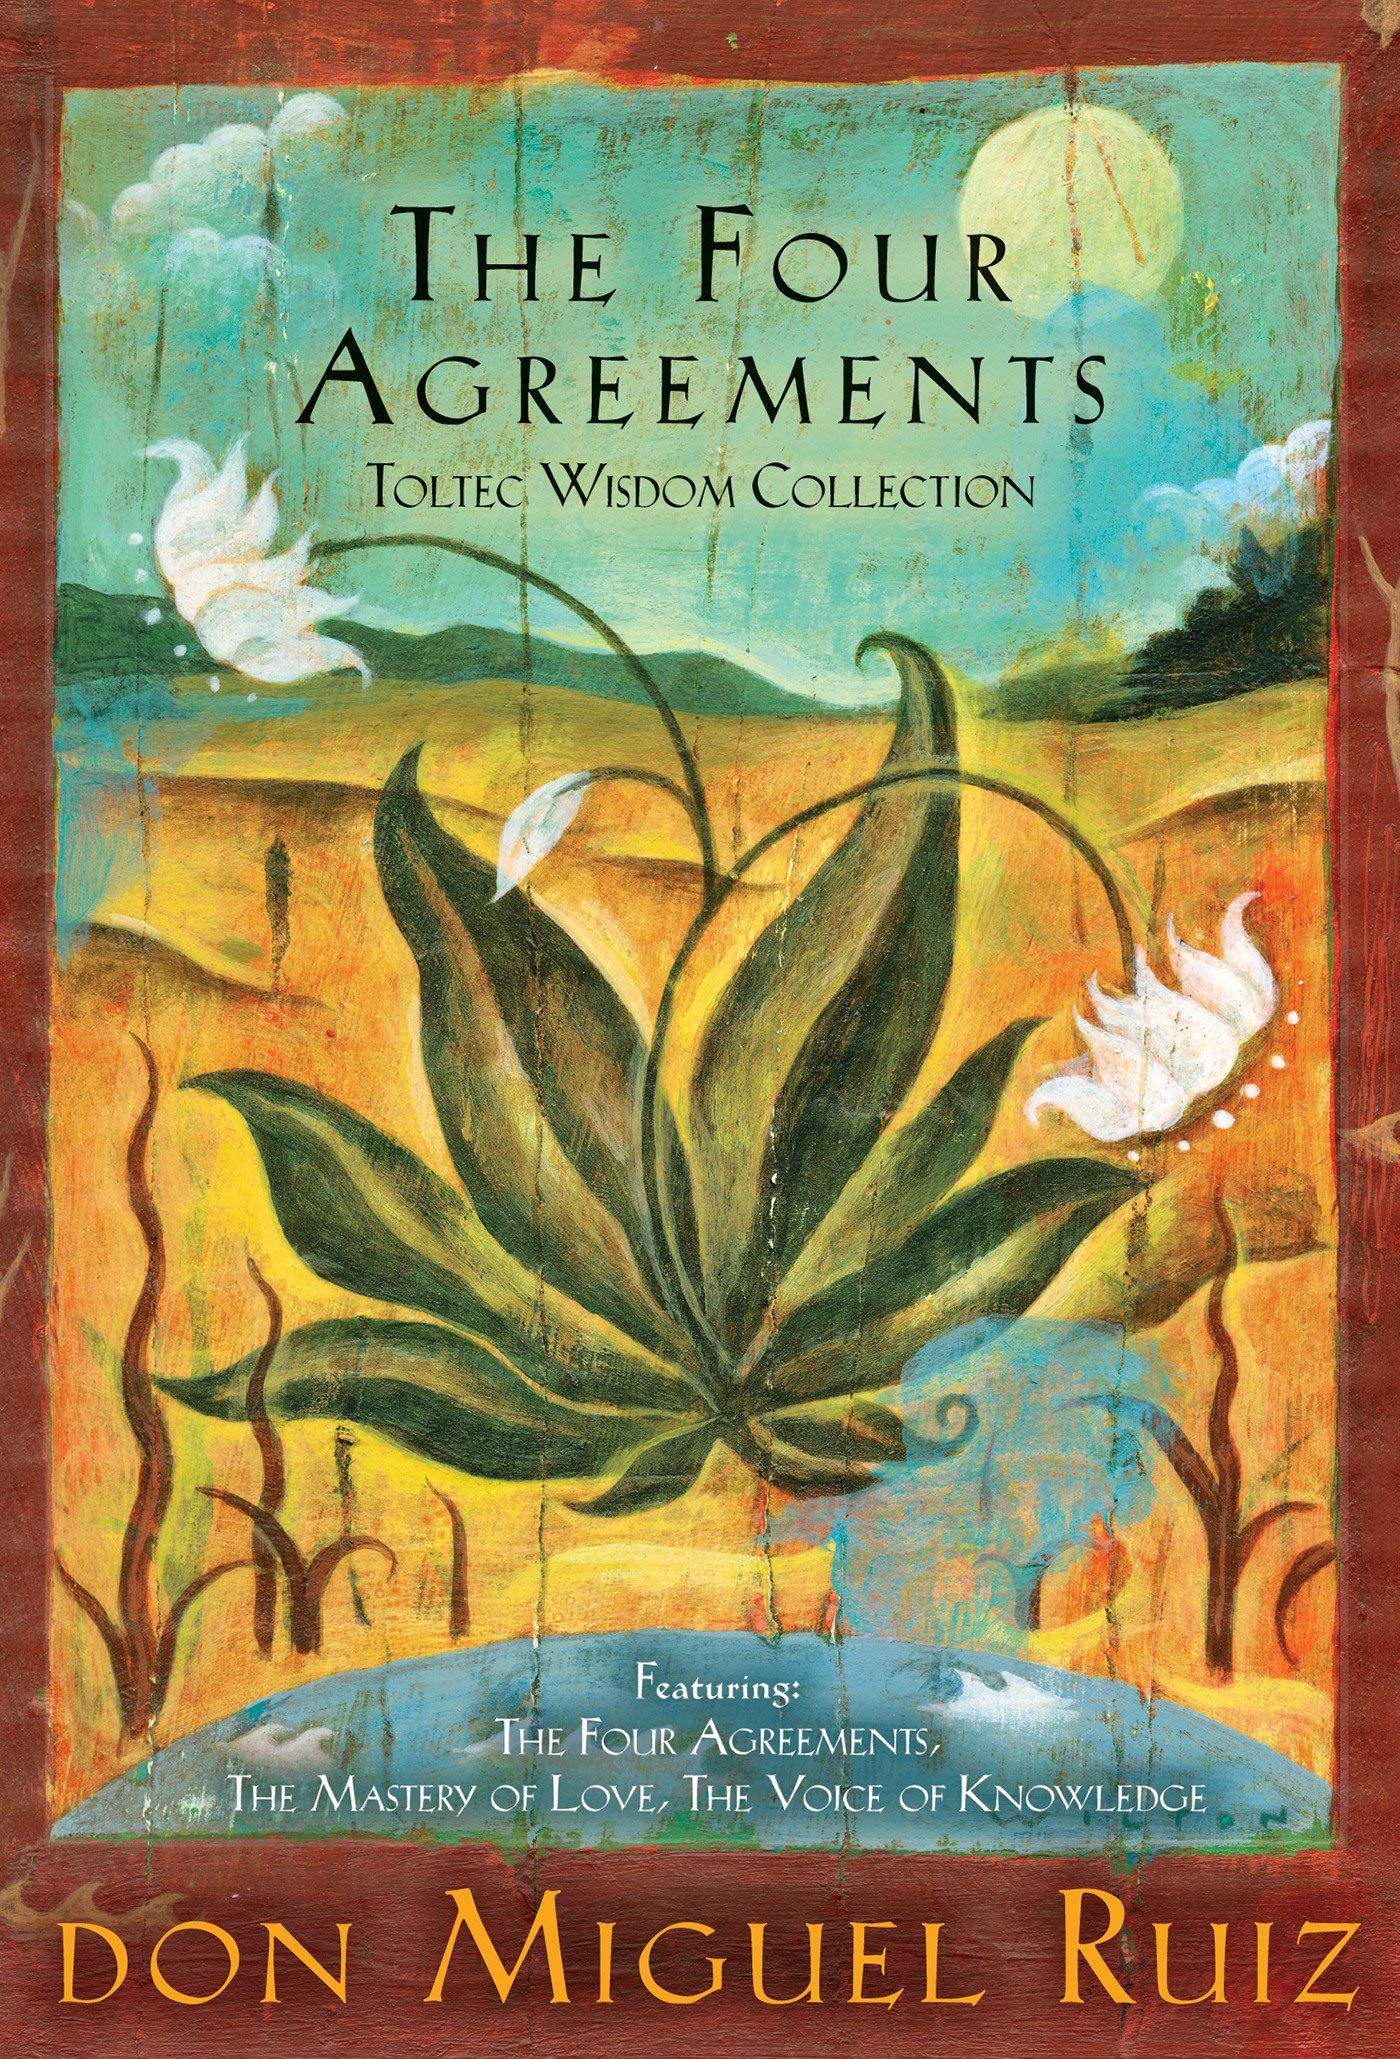 he Four Agreements Toltec Wisdom Collection by Don Miguel Ruiz.